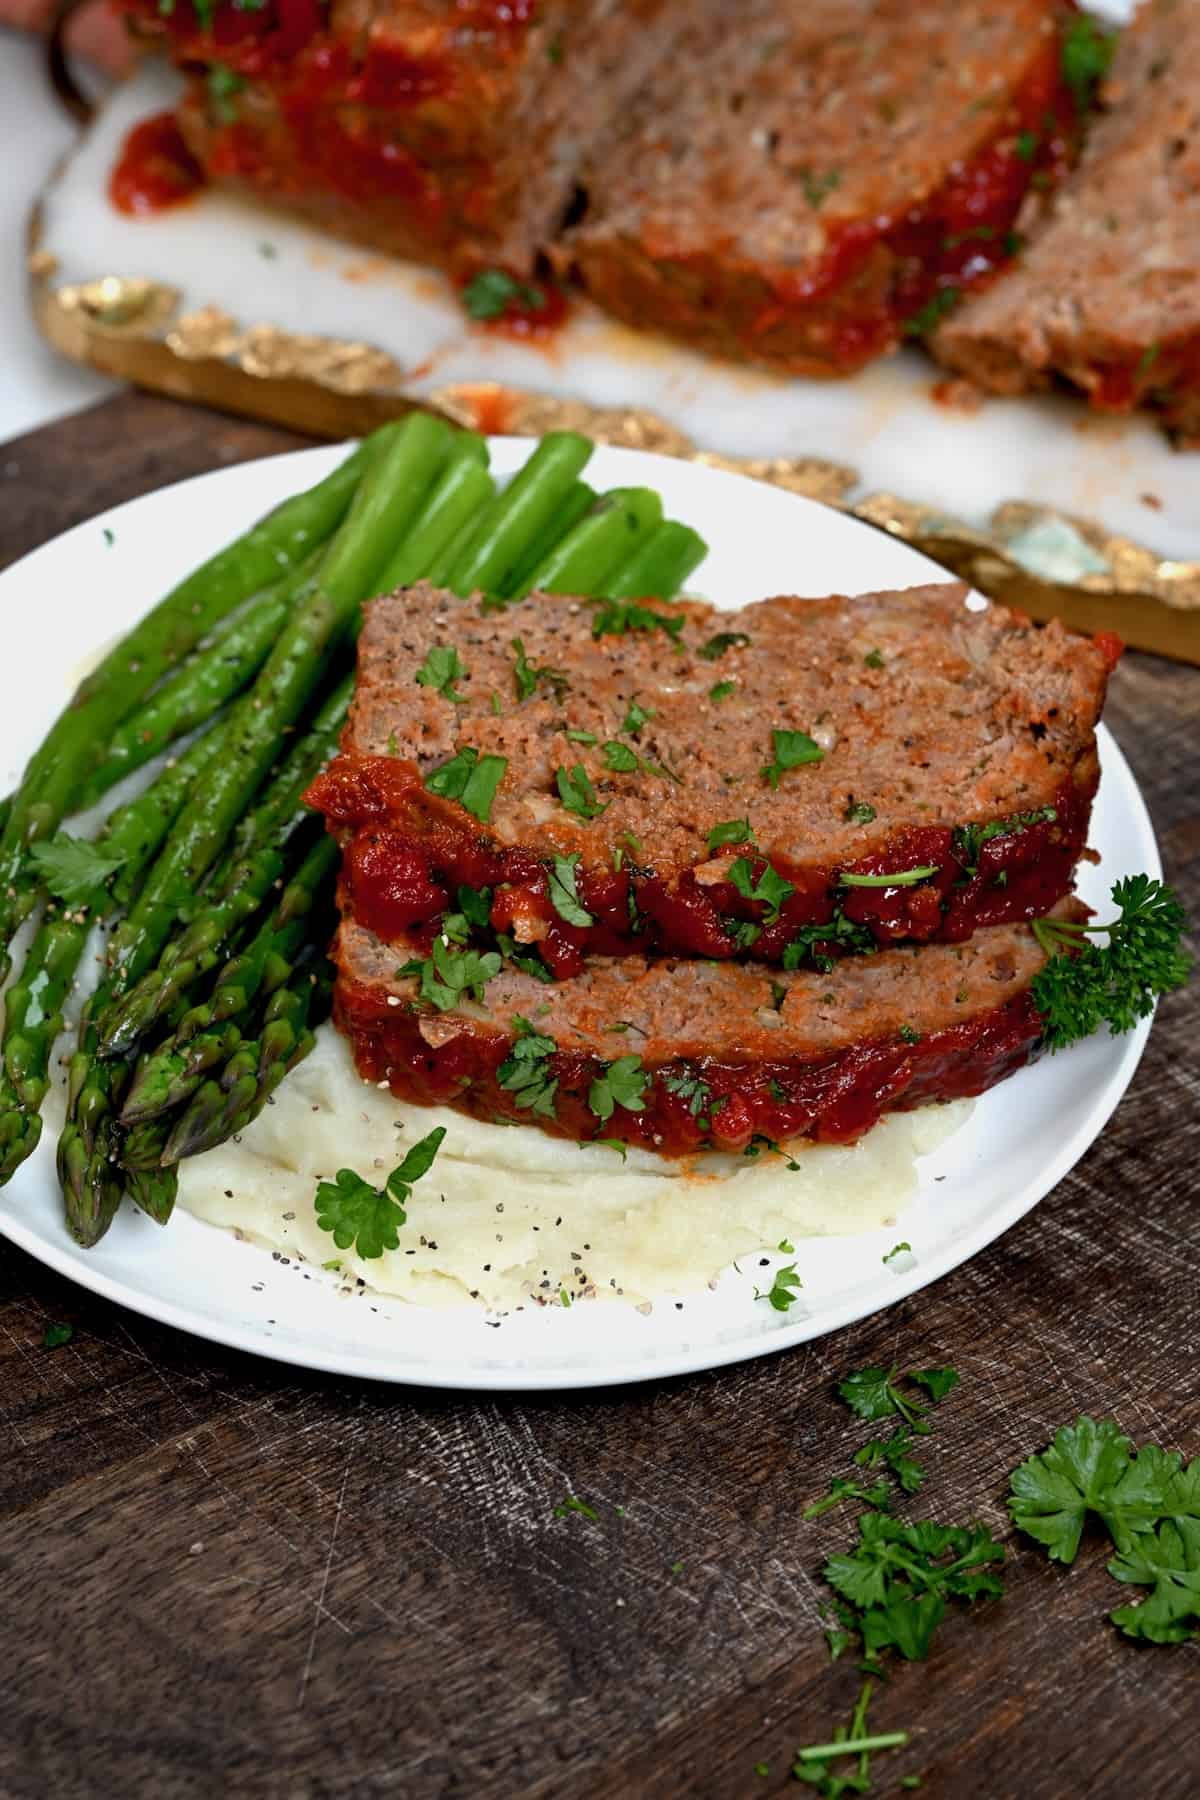 A serving of meatloaf with mashed potatoes and asparagus